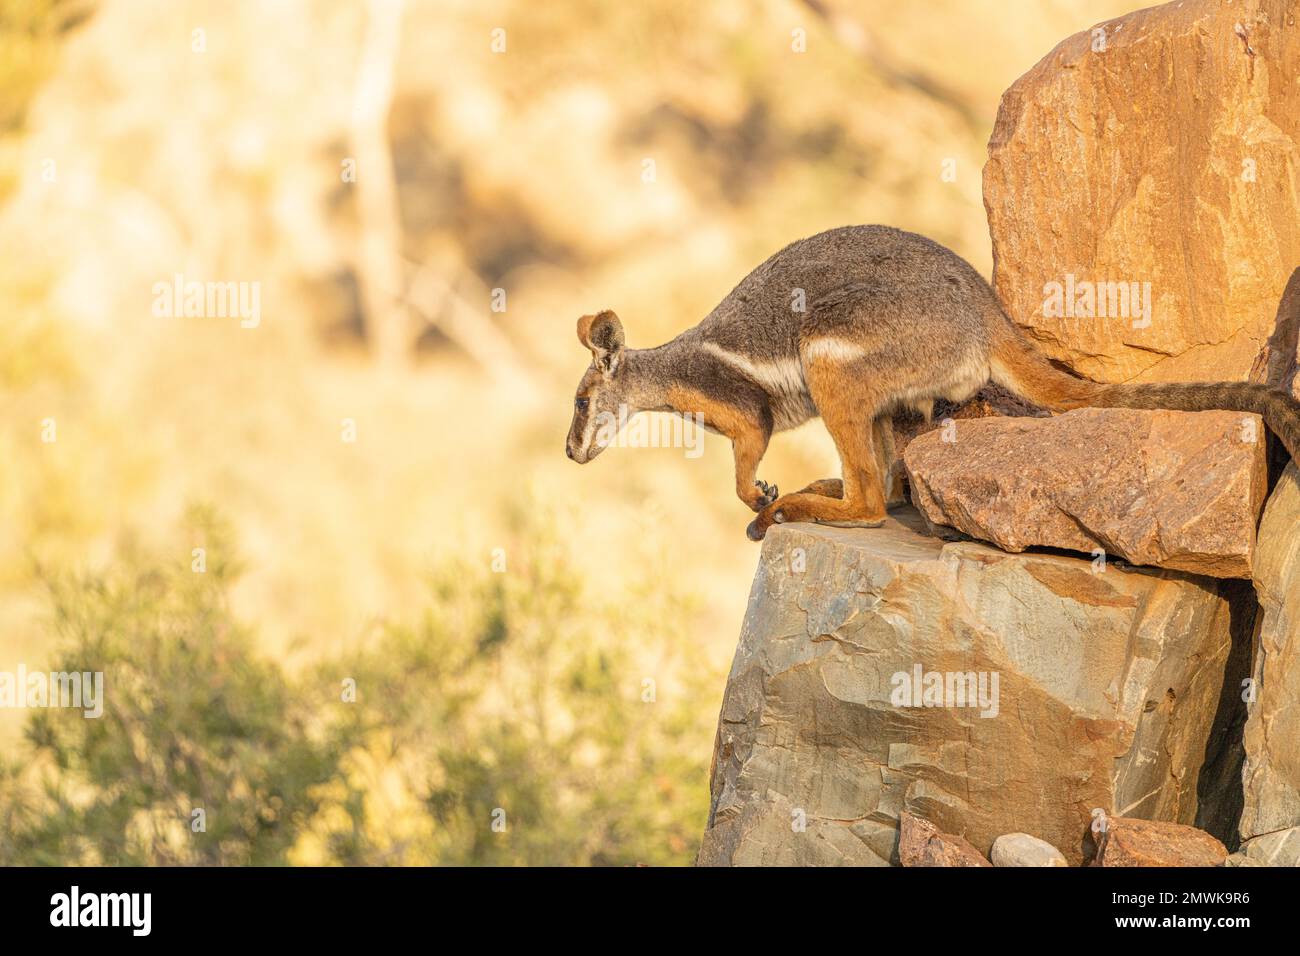 The endangered yellow-footed rock-wallaby at Arkaroola Wilderness Sanctuary South Australia. Stock Photo